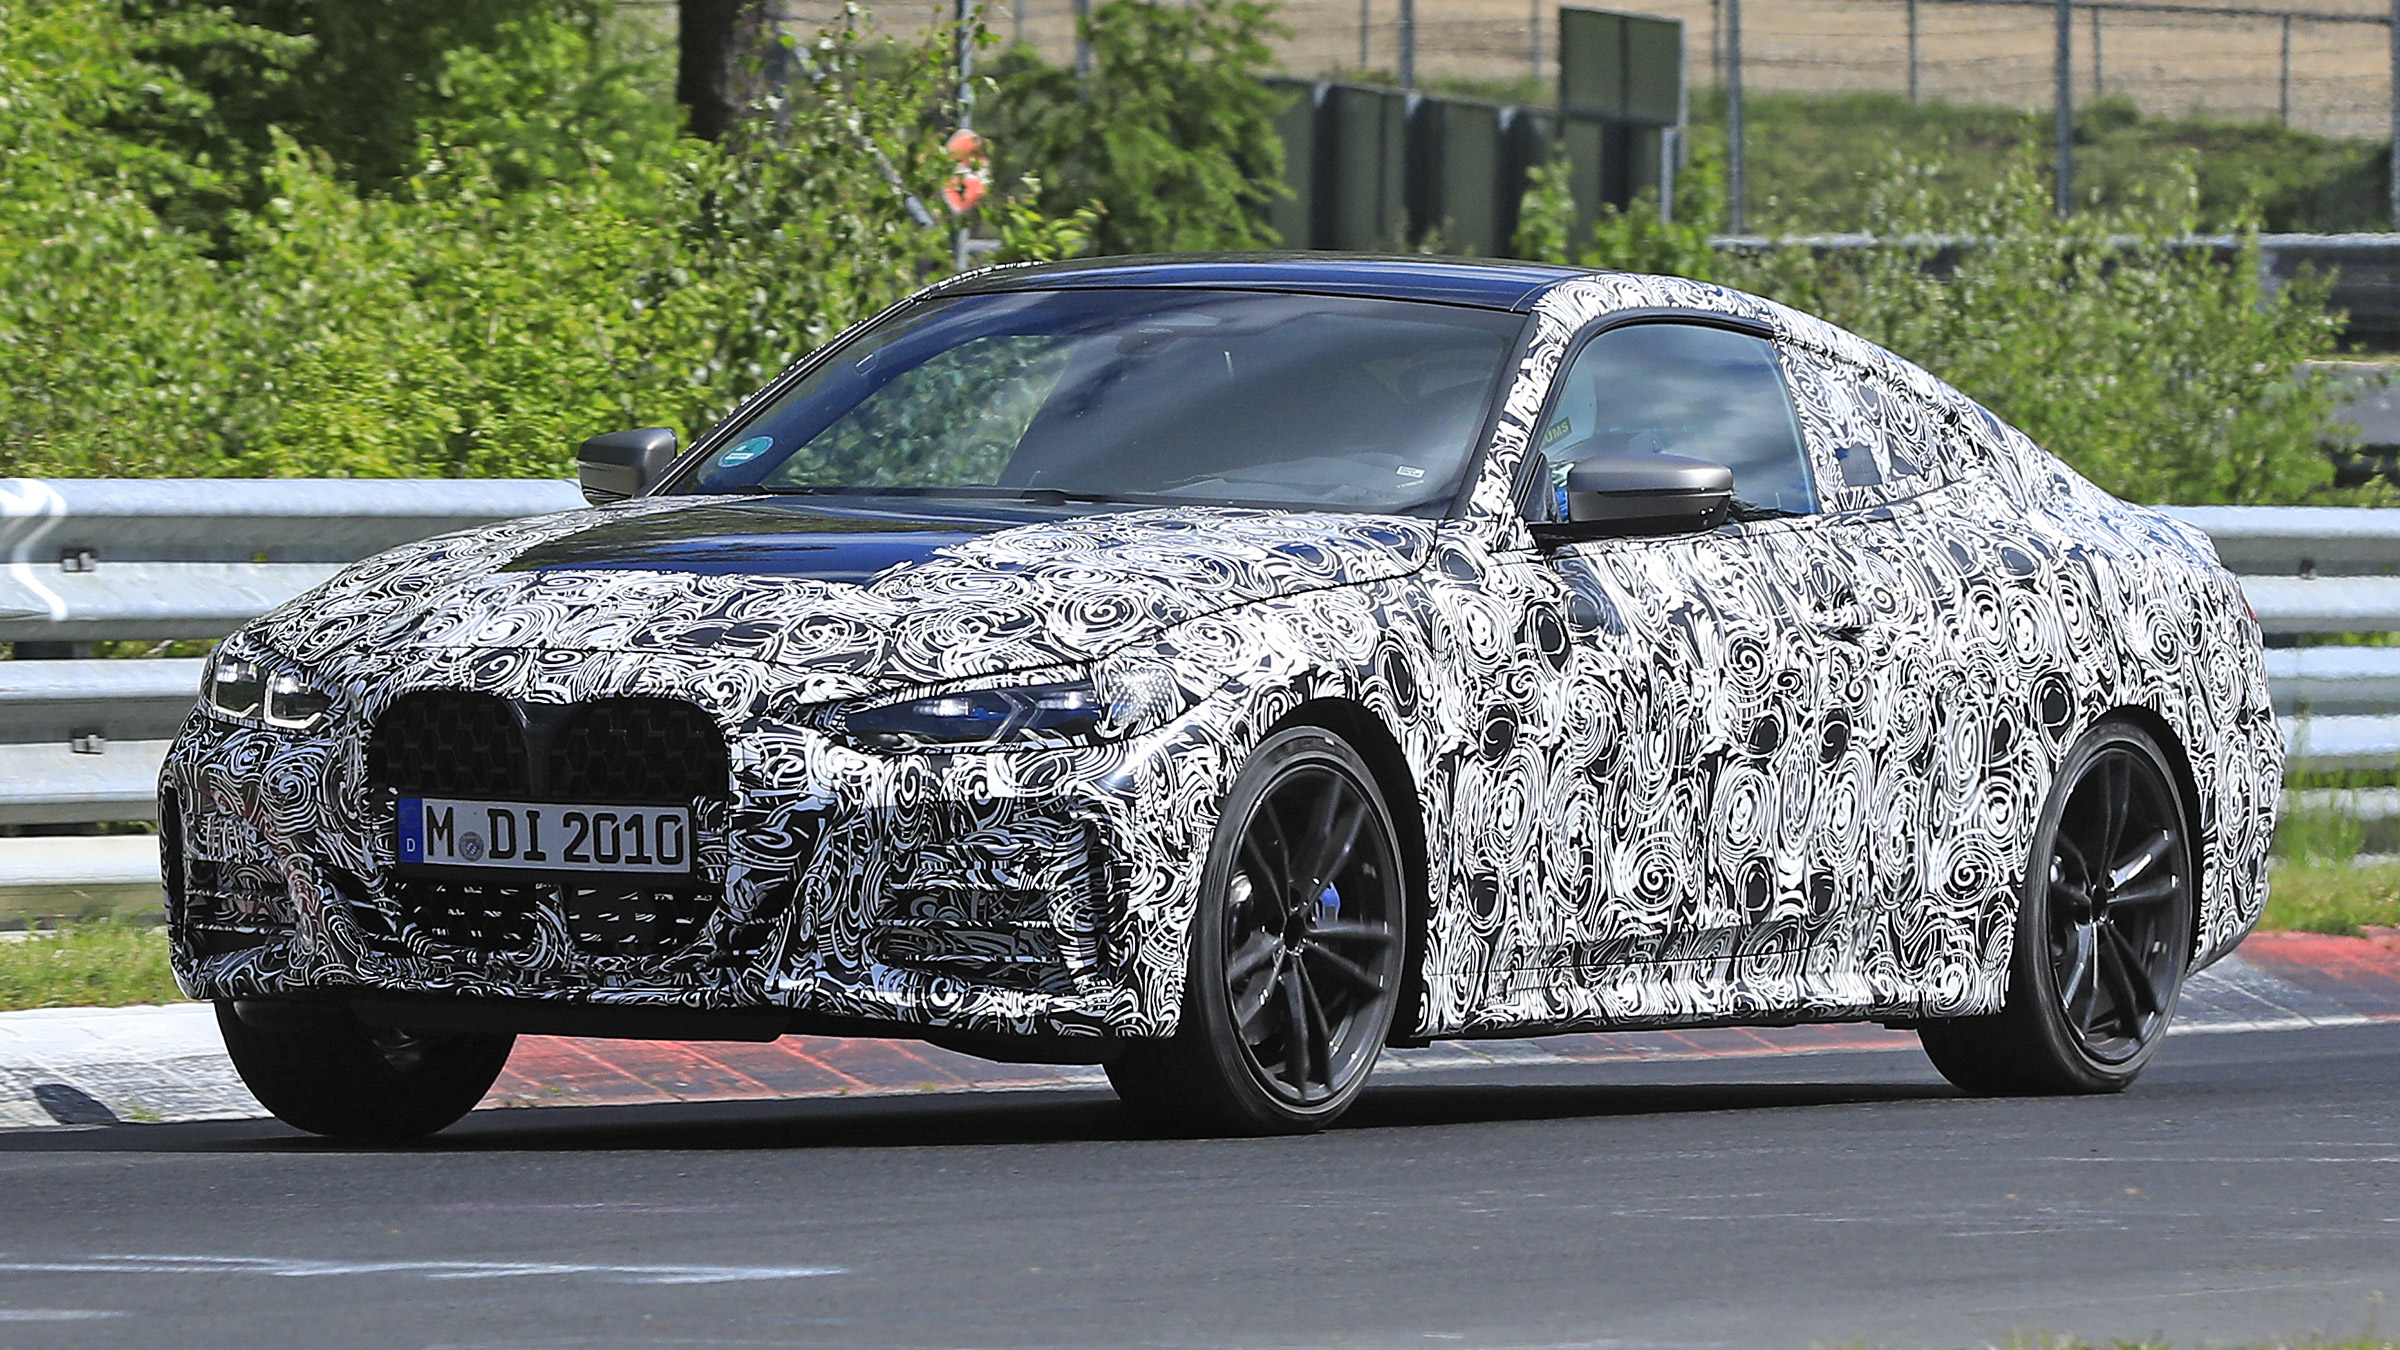 New 2020 BMW 4 Series Coupe spotted testing at the 